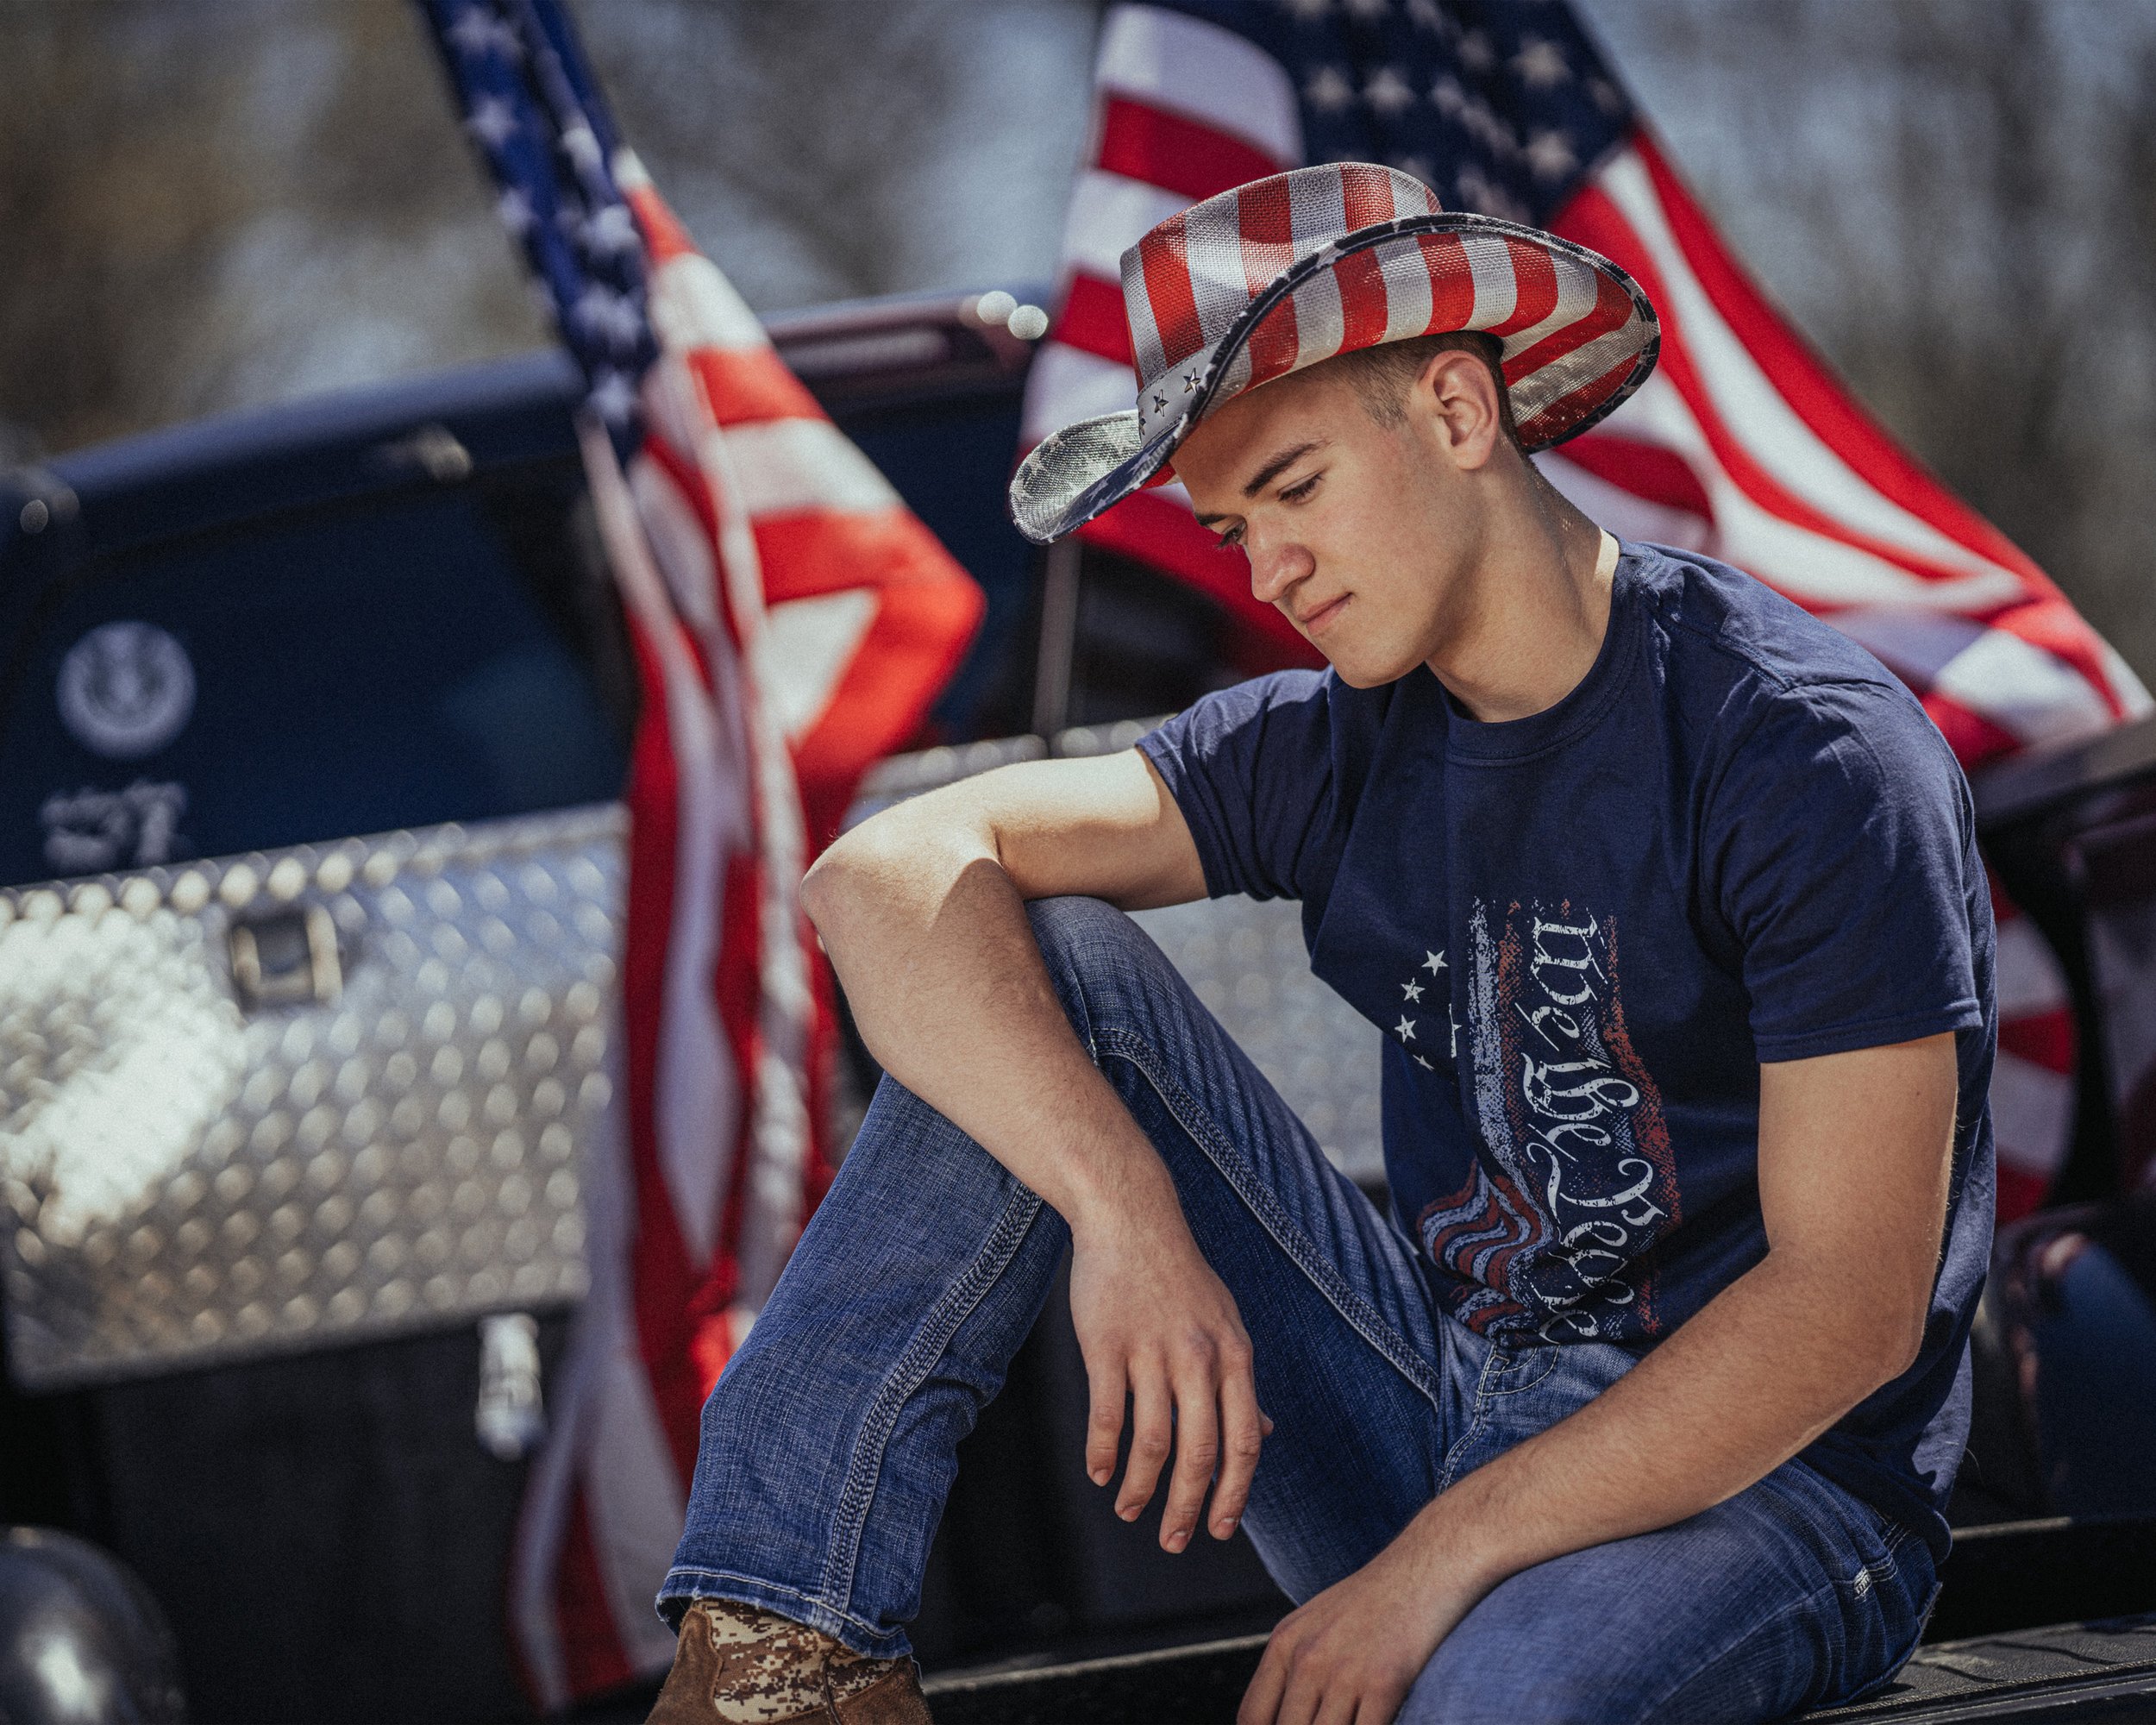 Country boy in America apparel with truck